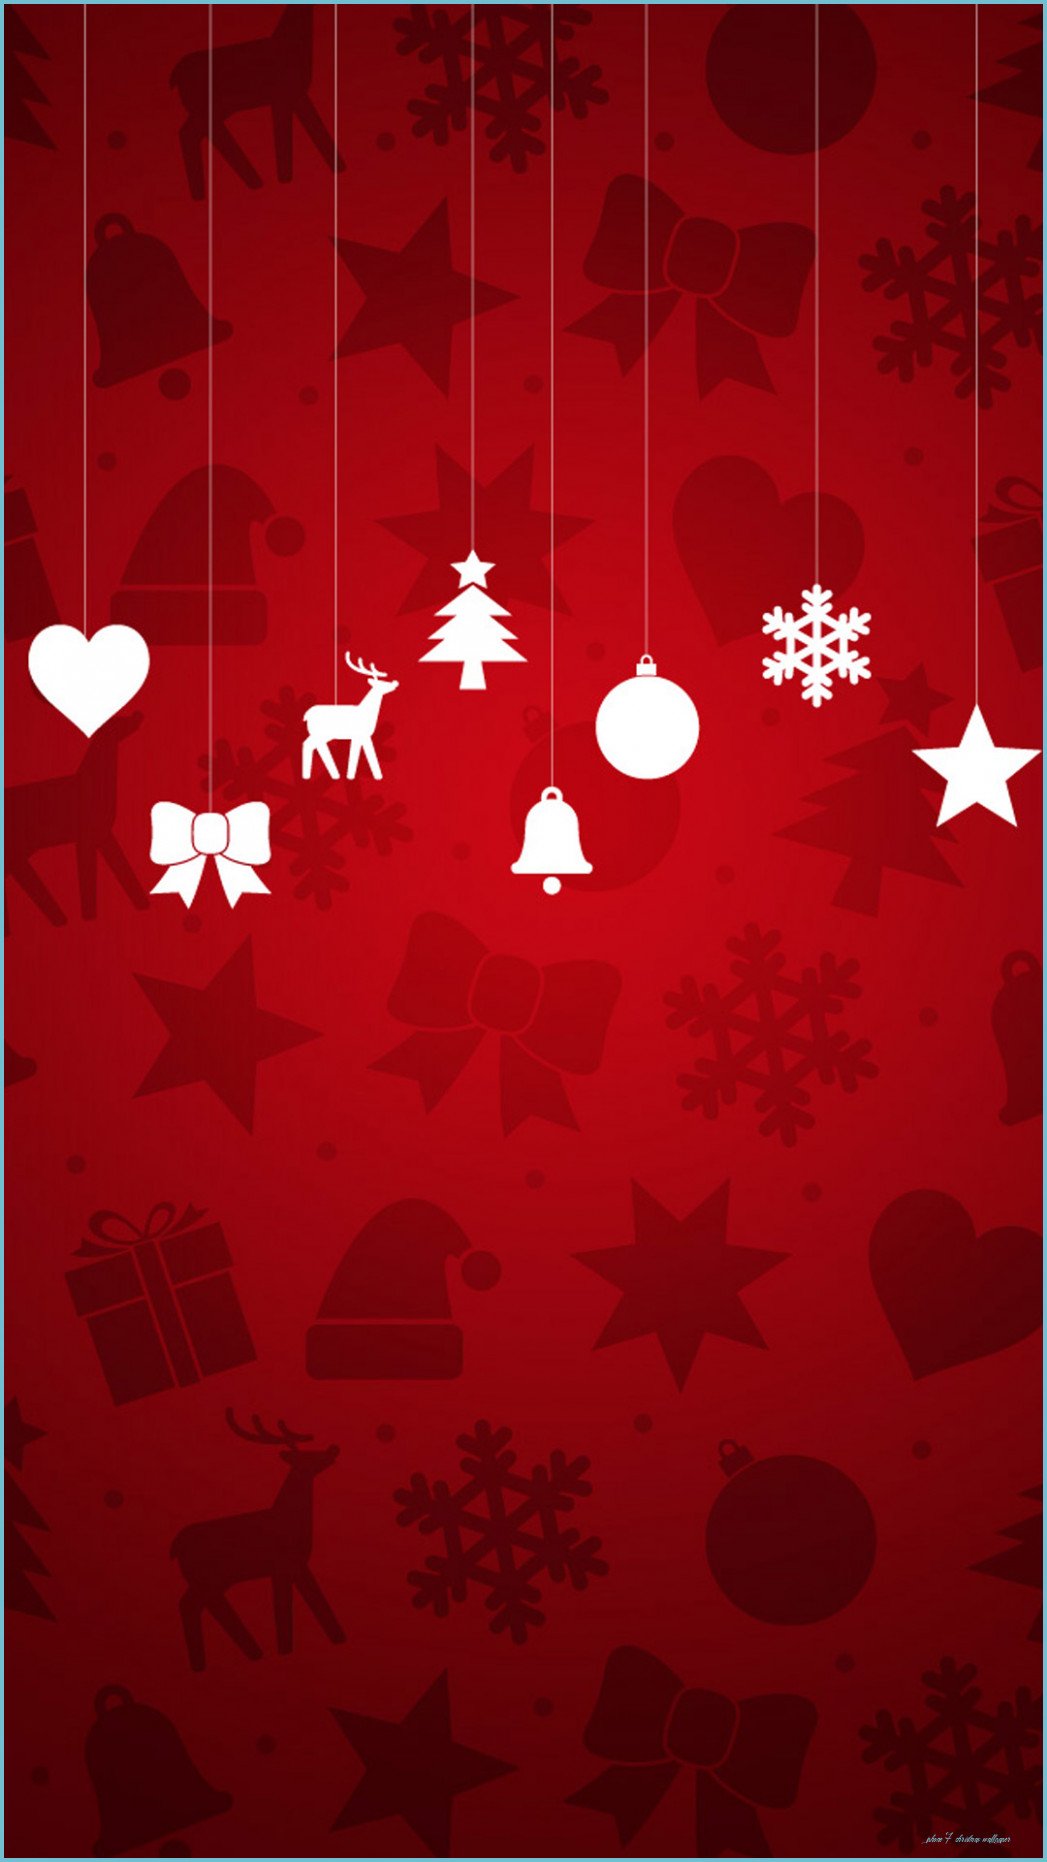 Christmas Wallpaper for iPhone 12